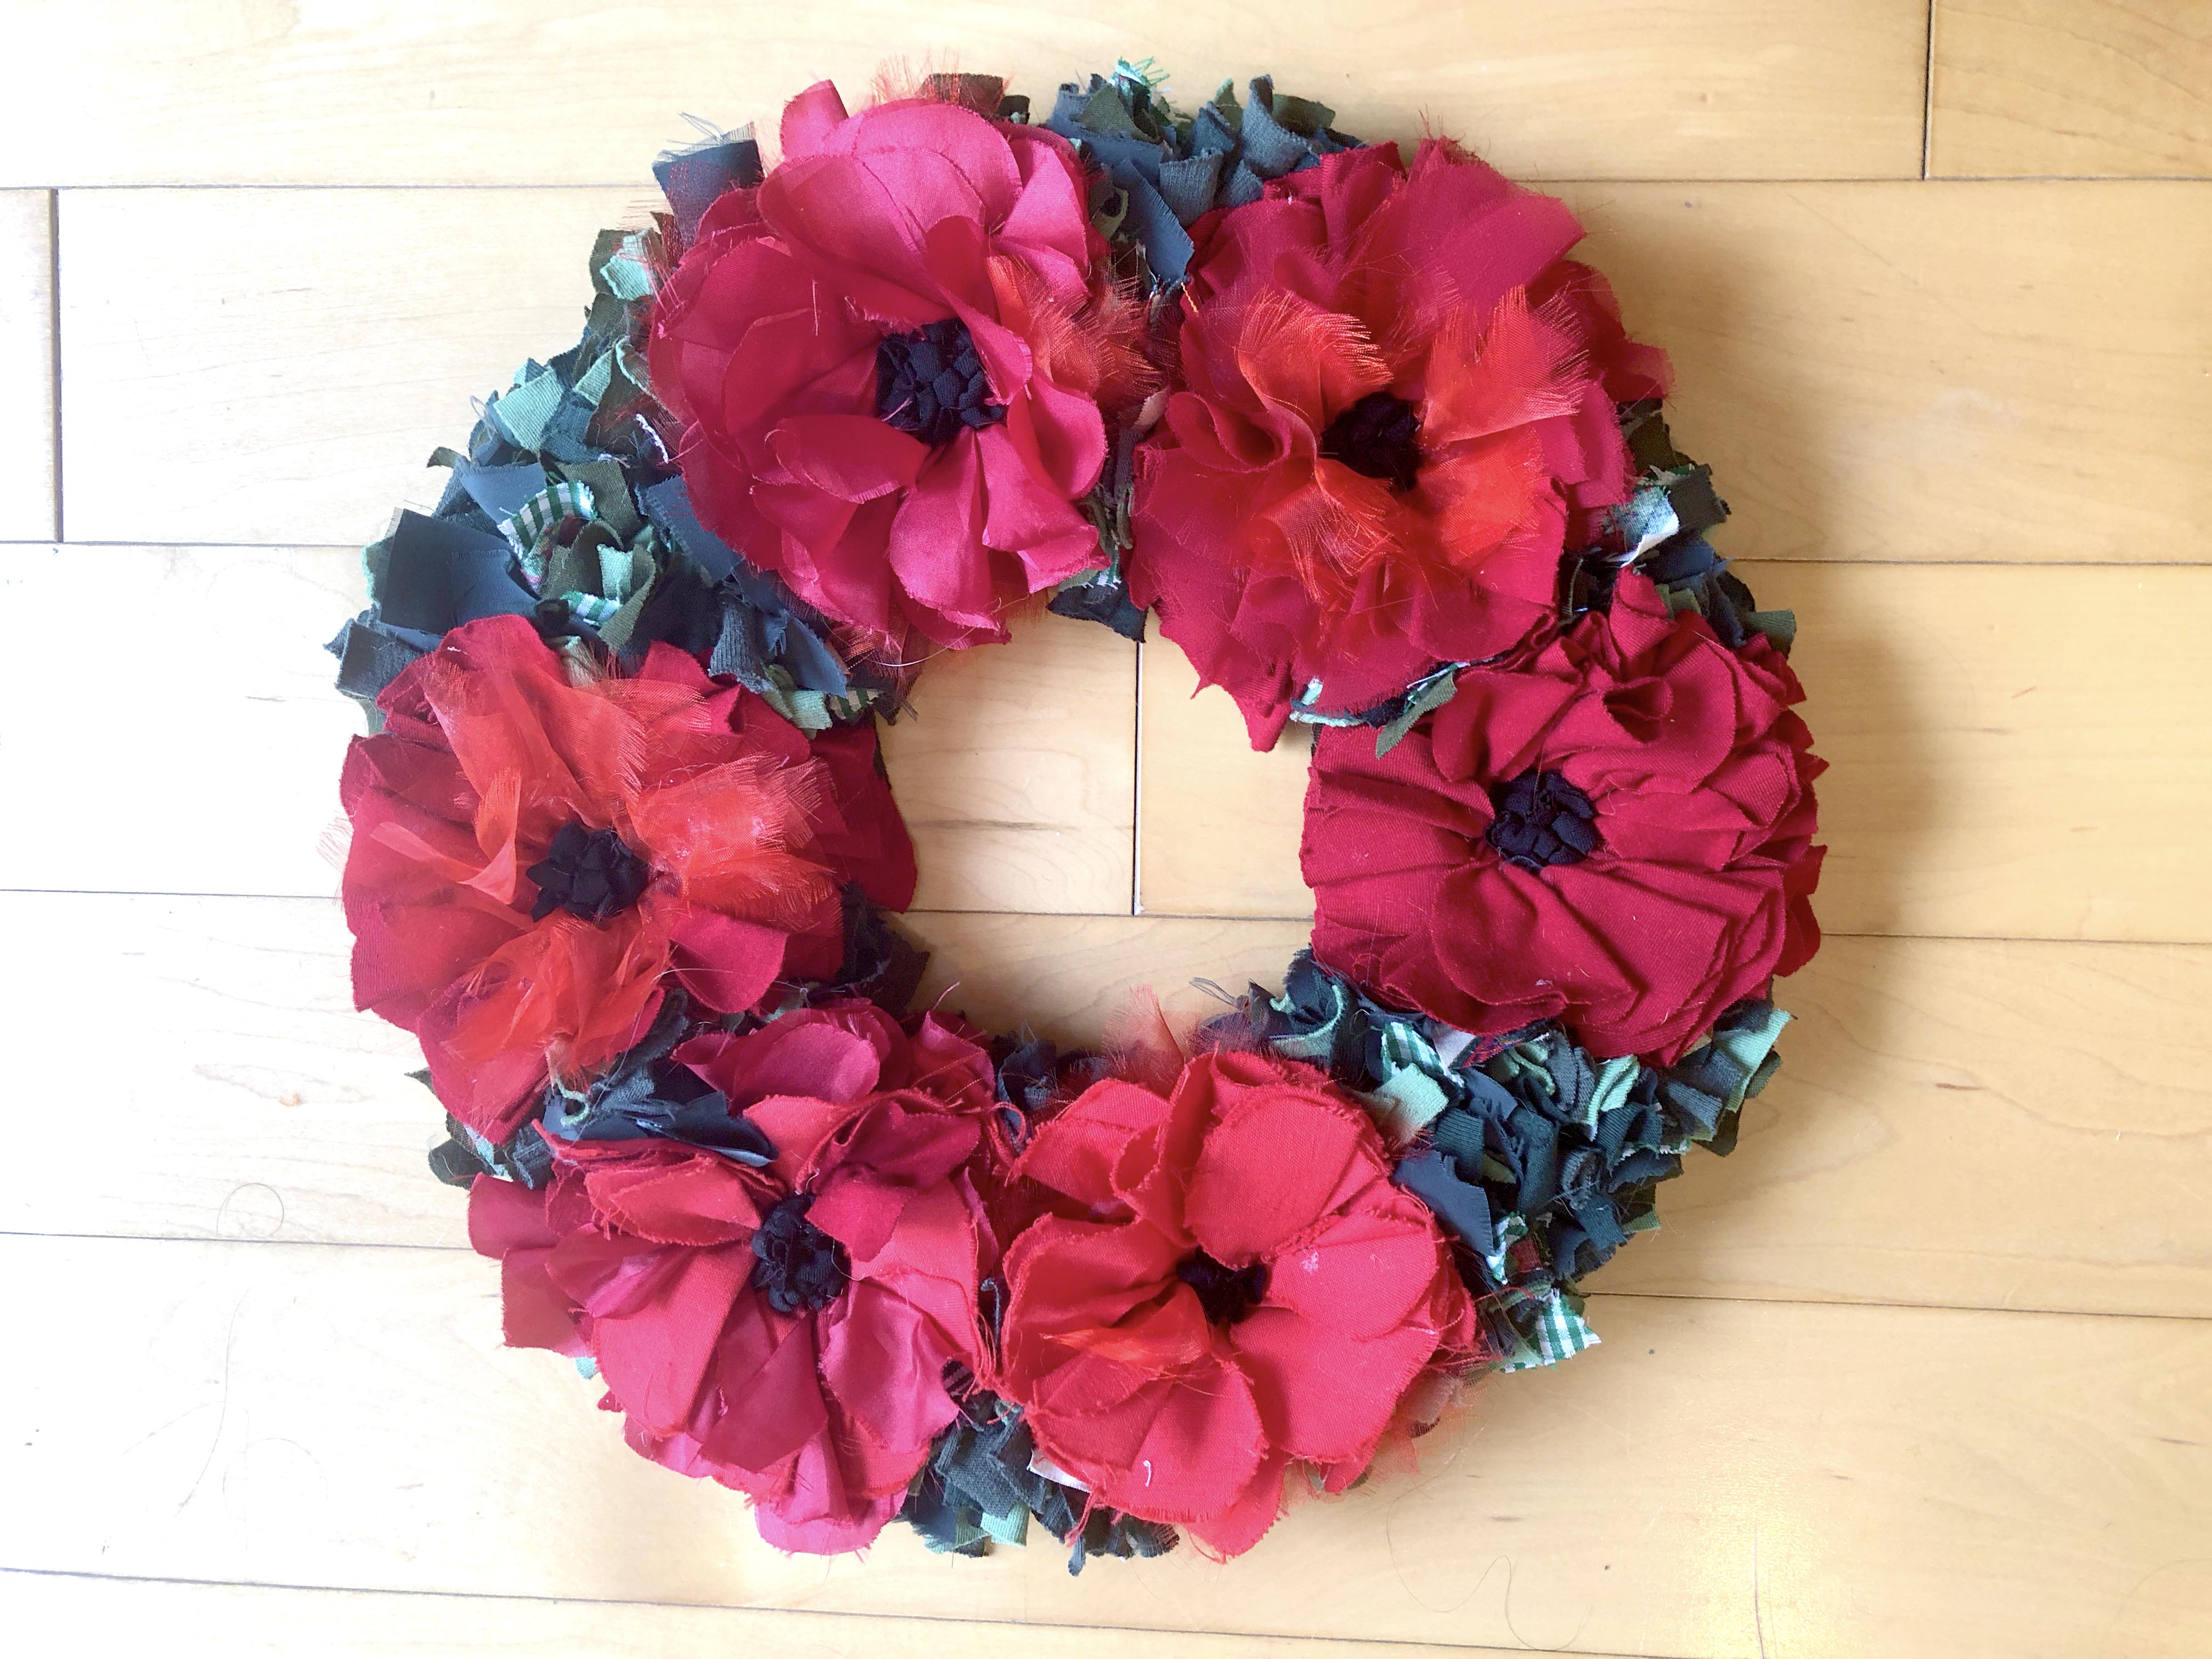 Remembrance day rag rug poppy wreath made using recycled textile waste. Red poppies with green fabric in between. 